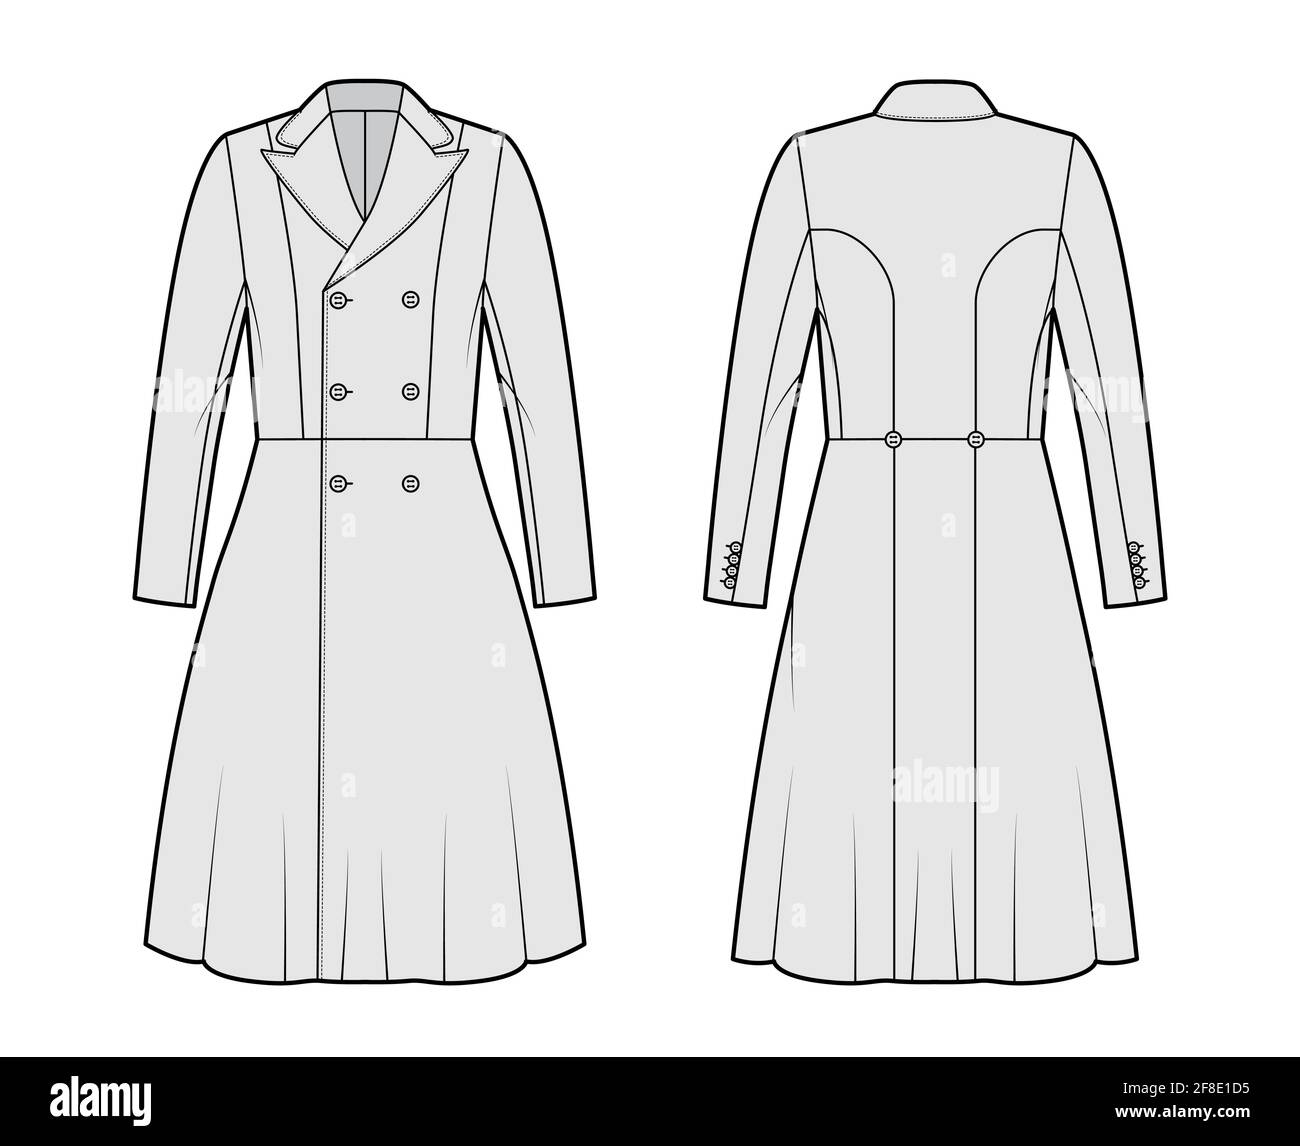 Redingote coat technical fashion illustration with double breasted, fitted, long sleeves, peak lapel collar, knee length. Flat jacket template front, back grey color style. Women, men, unisex top CAD Stock Vector